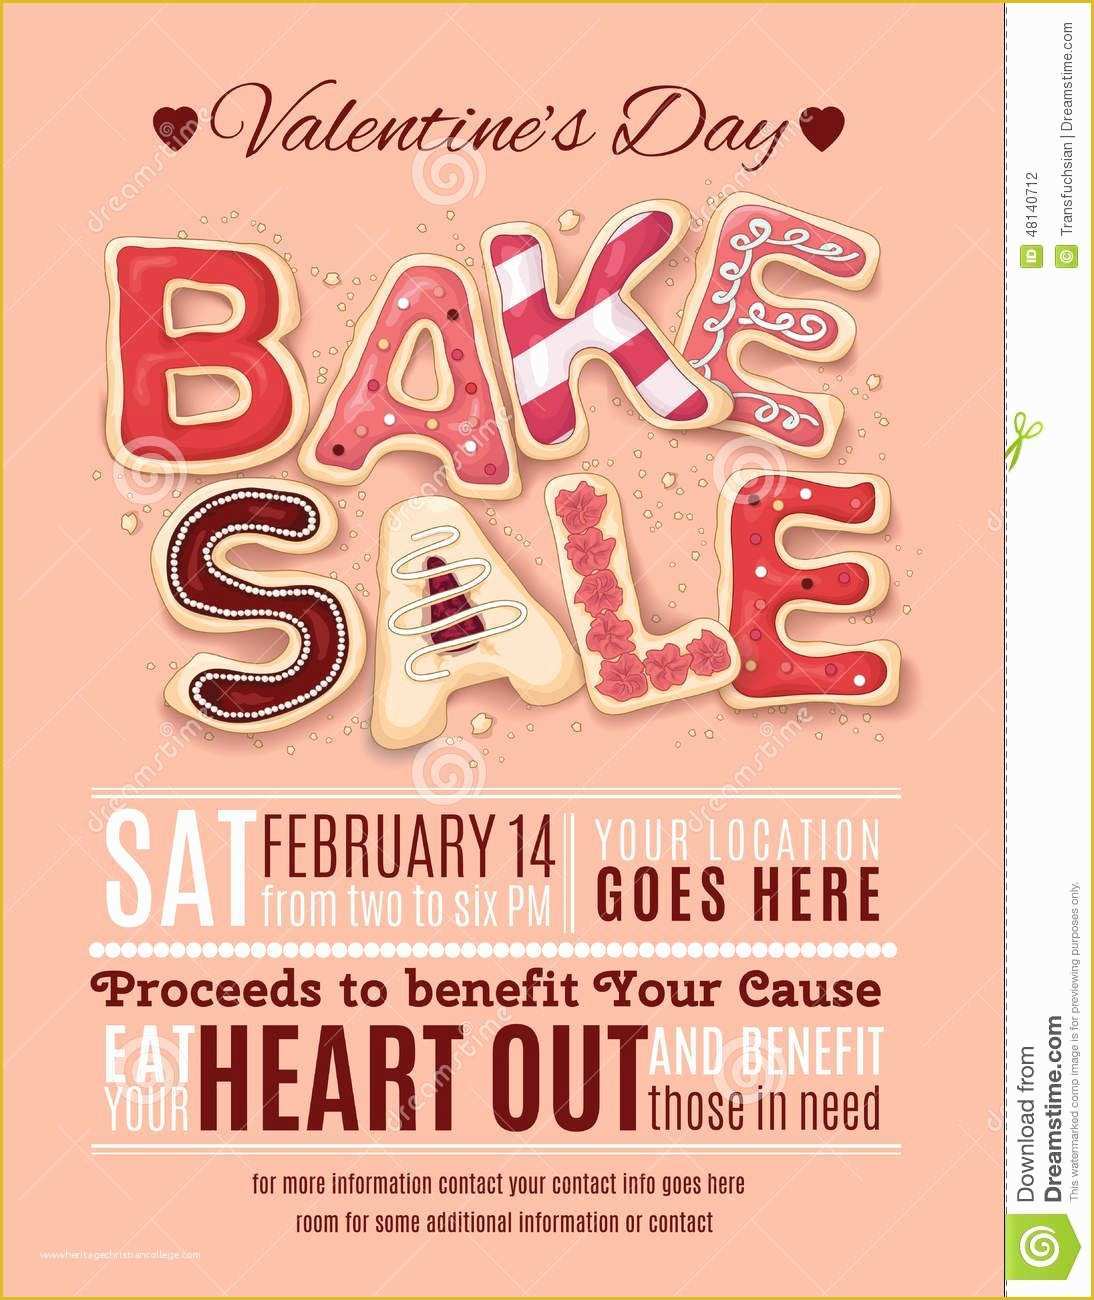 Bake Sale Flyer Template Free Of Valentines Day Bake Sale Flyer Template Download From